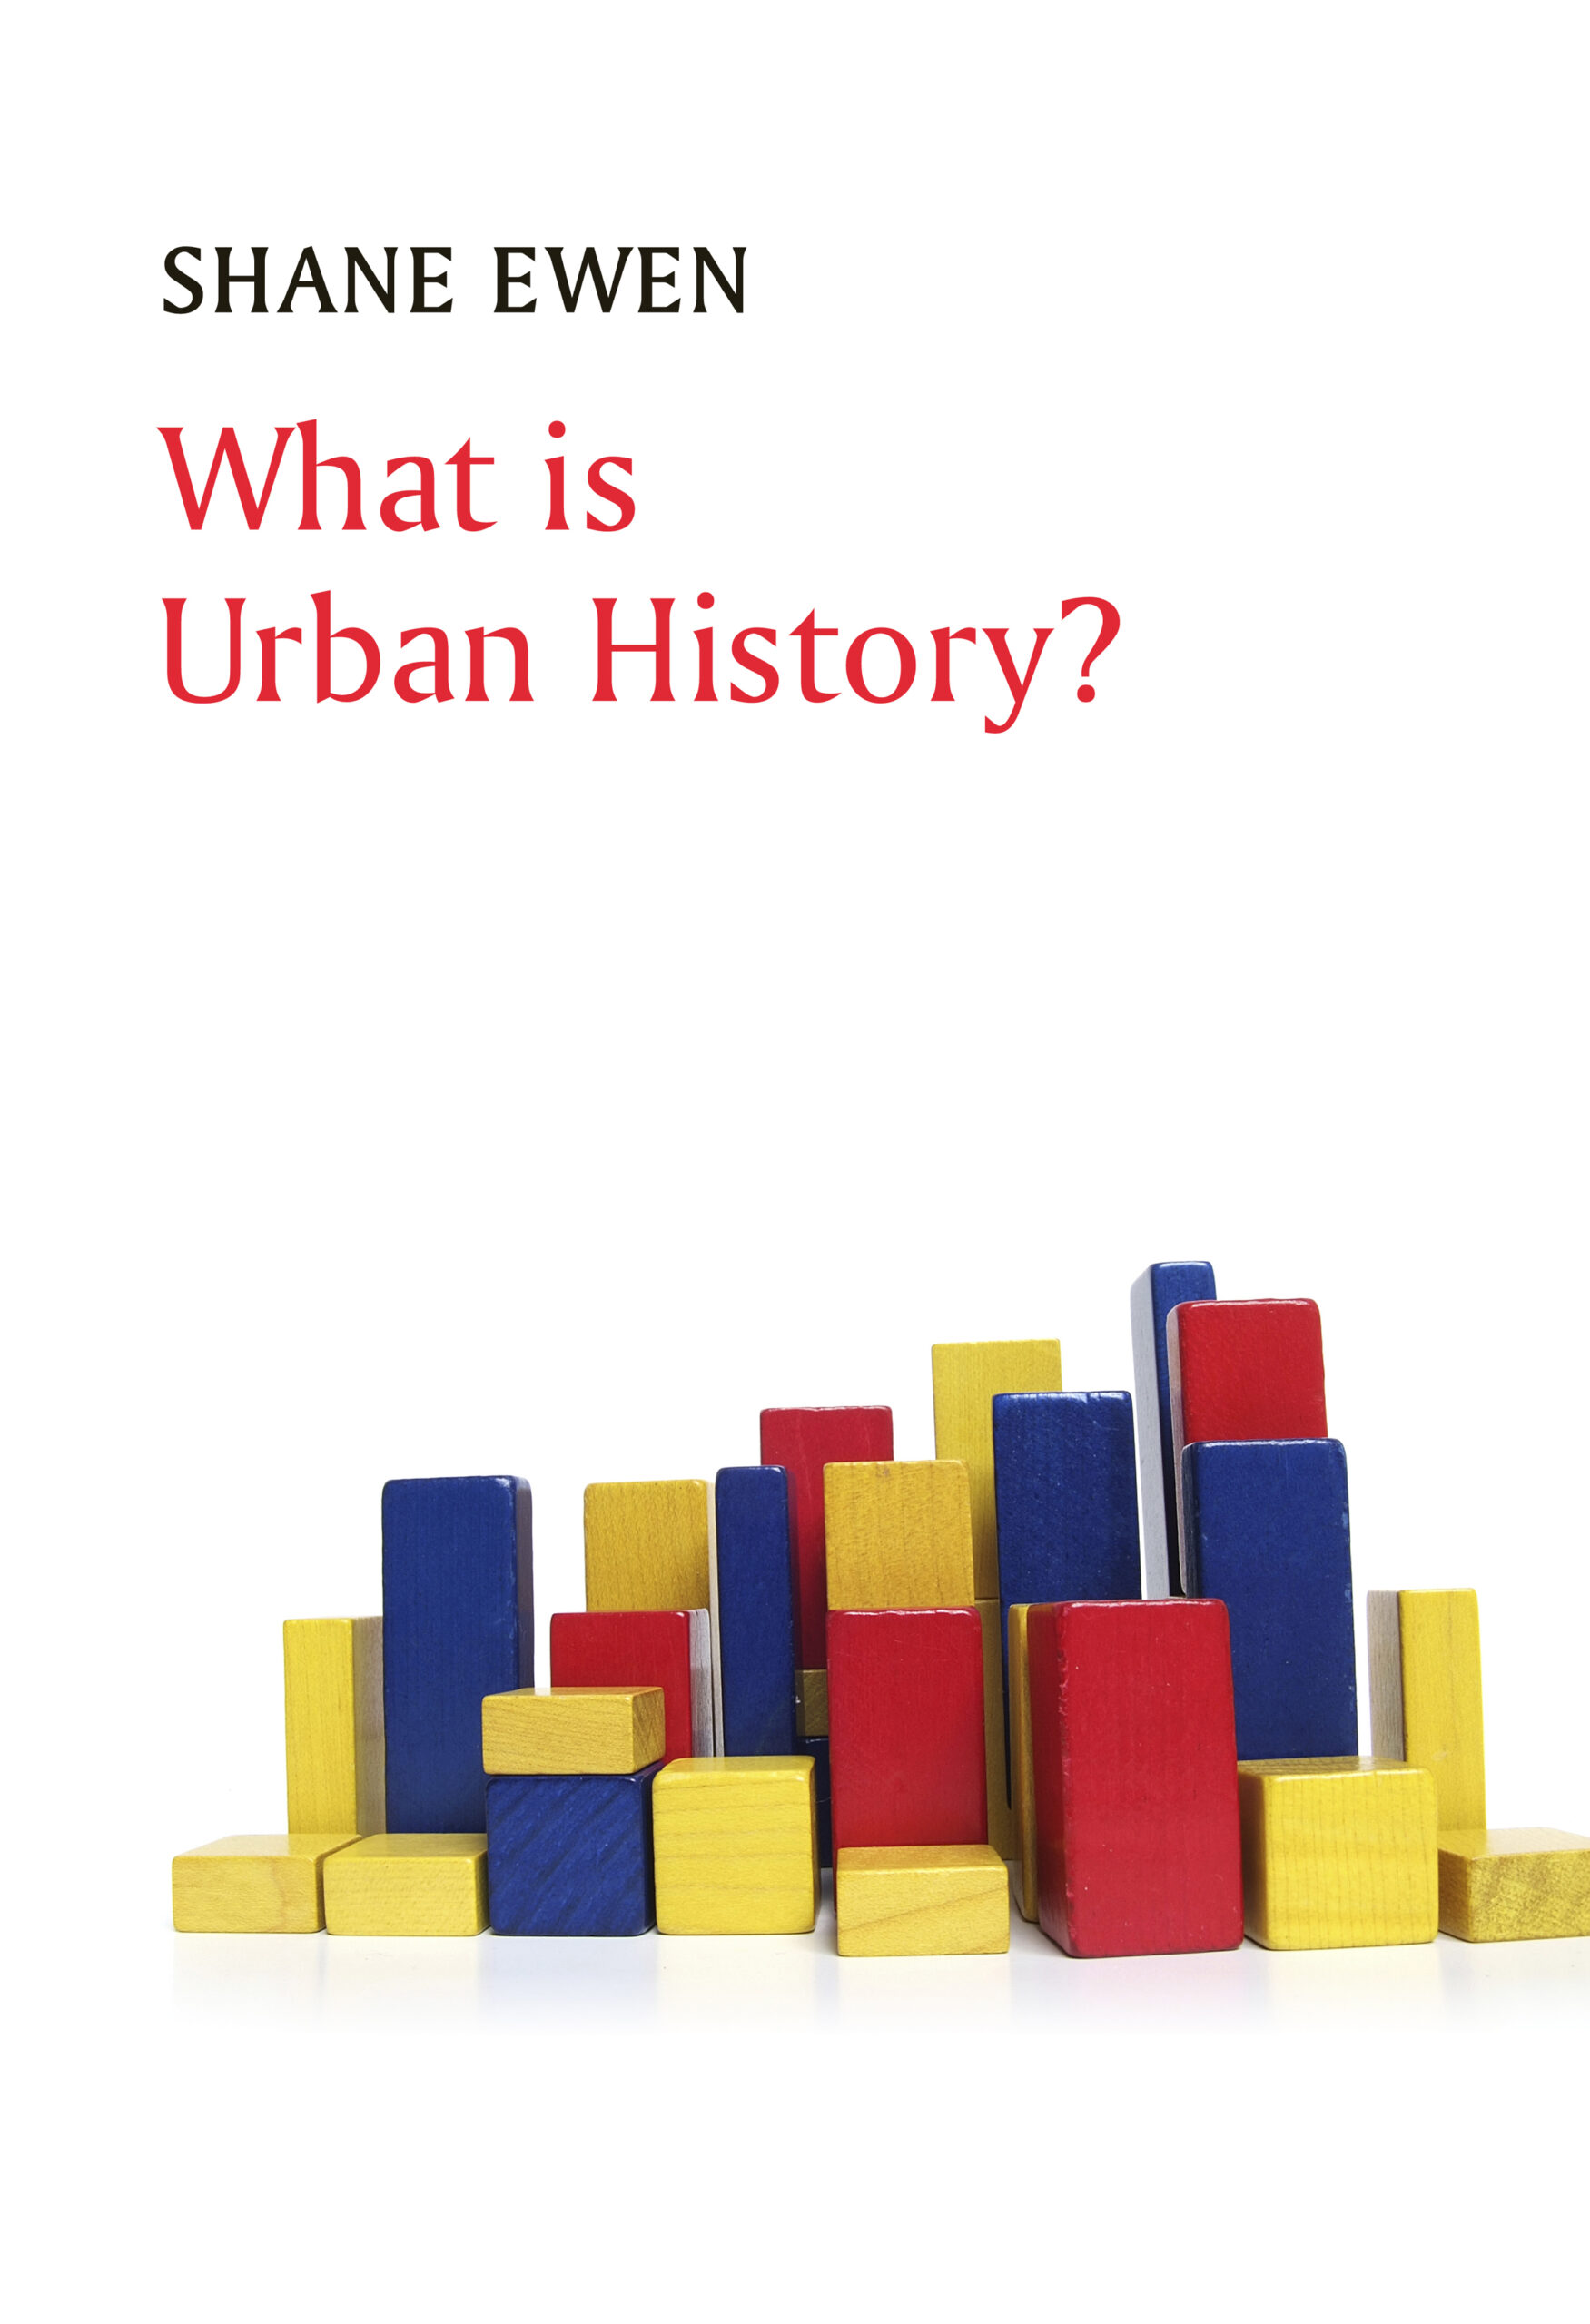 What is urban history?